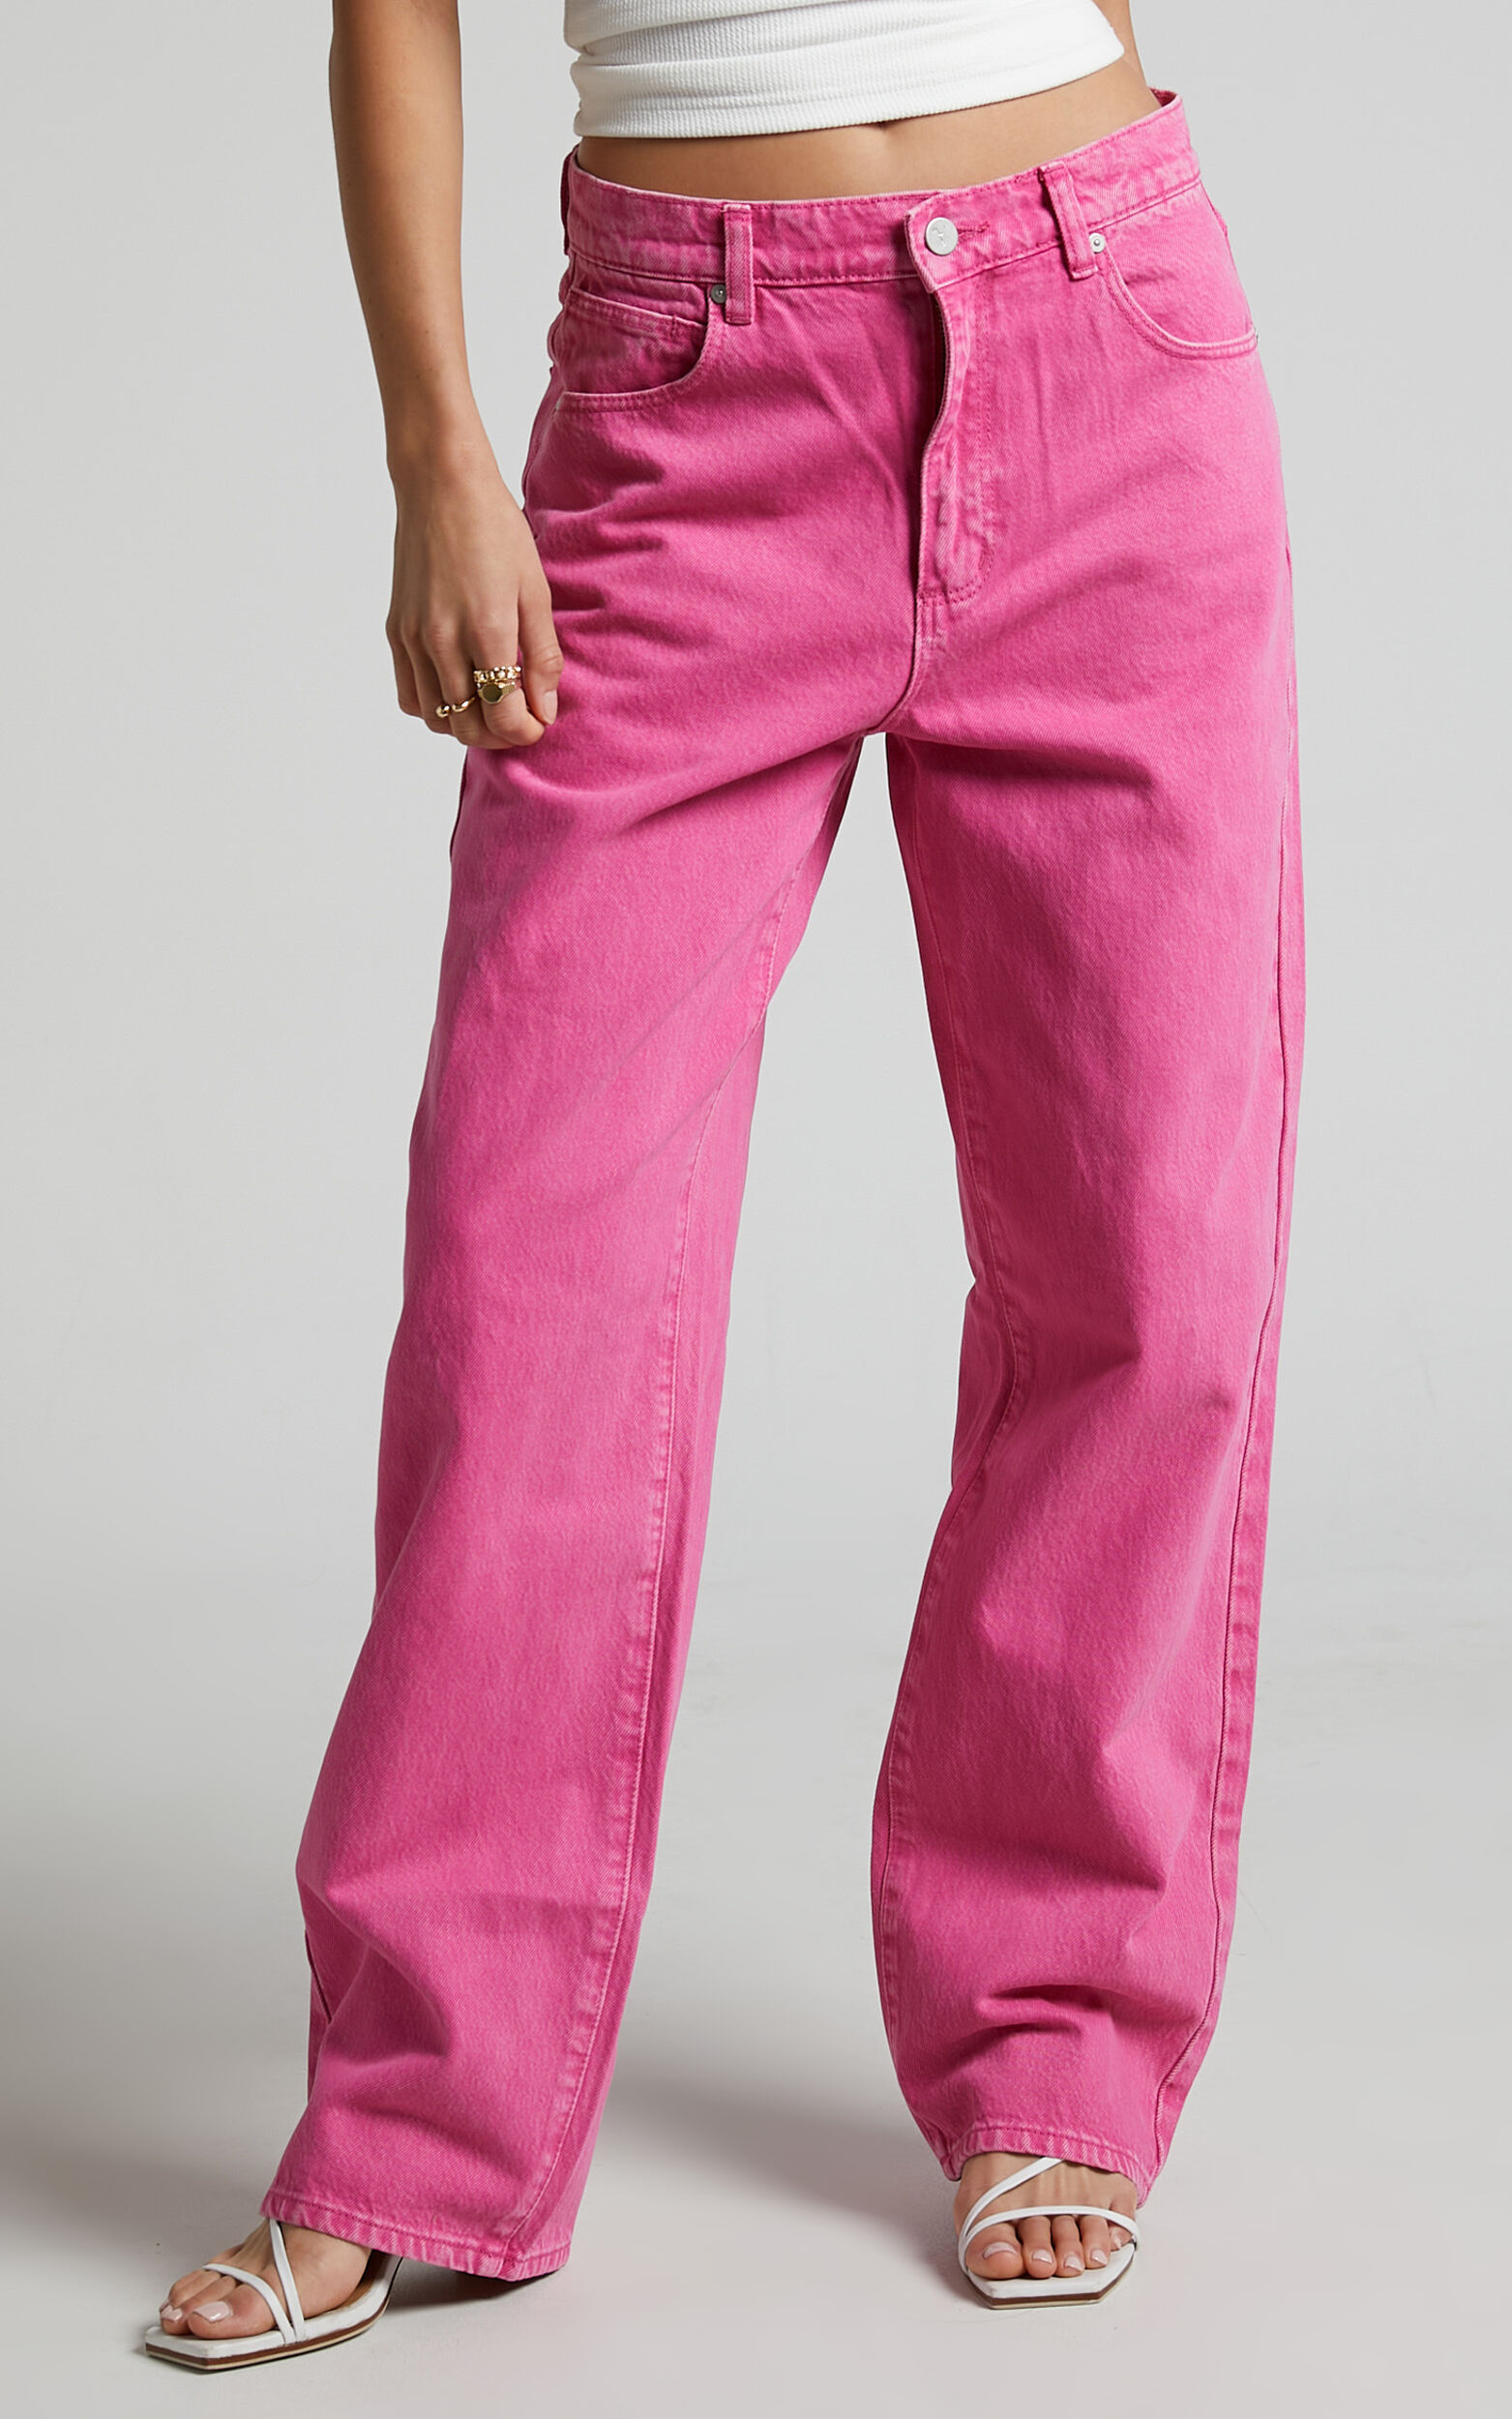 Abrand - A Slouch Jean Super Pink Stoned Jeans in Super Pink - 06, PNK1